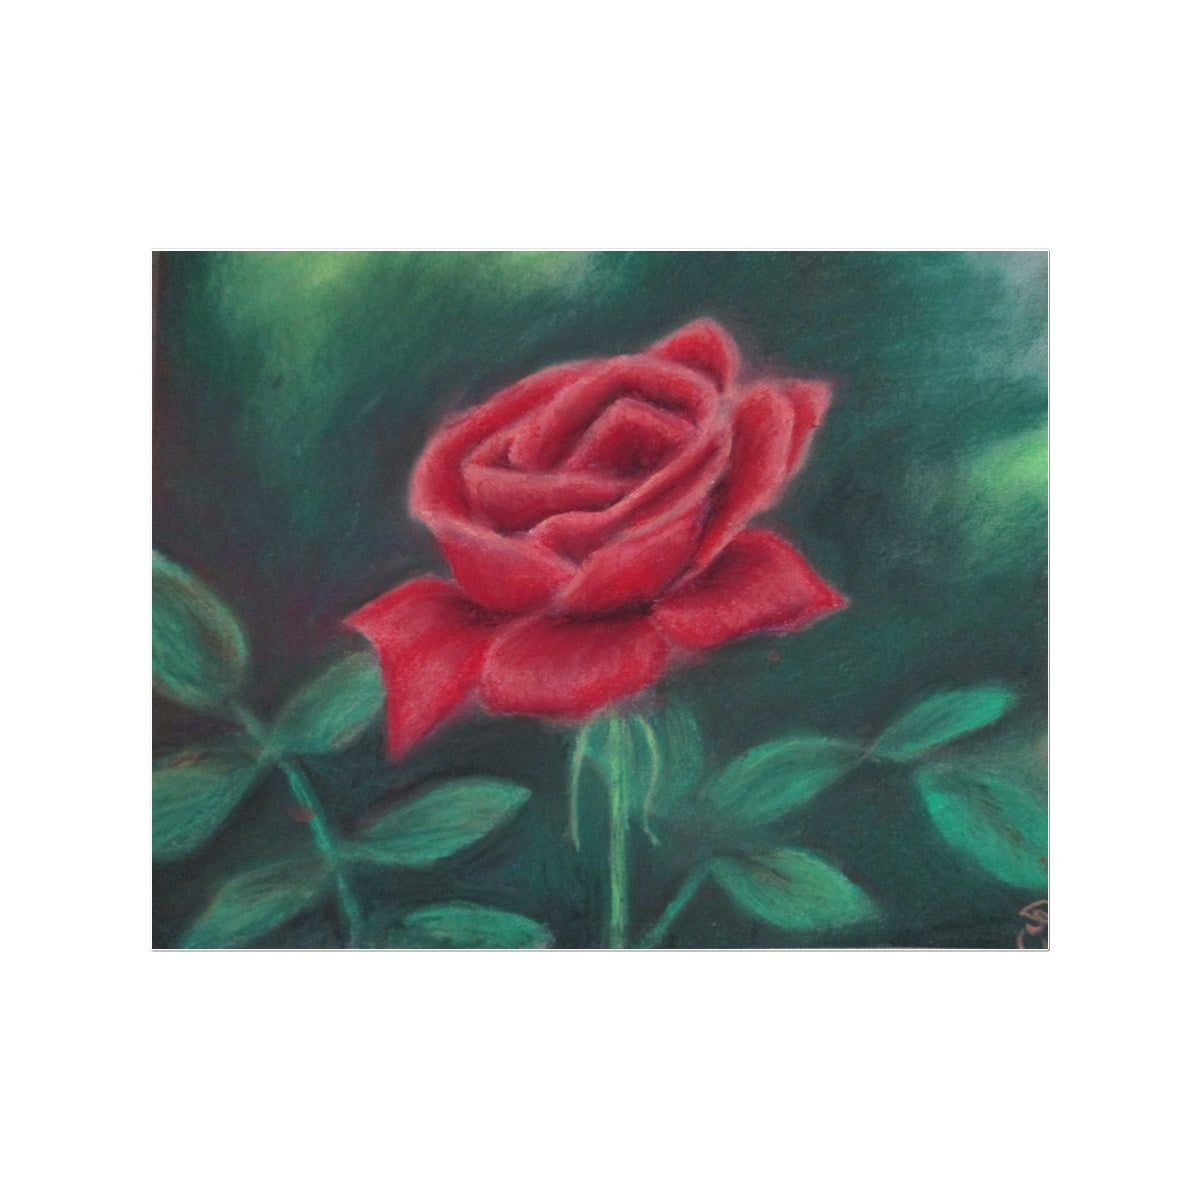 Poet and her Soul Speaking Paintings ~ prints, originals and more  Petals of rose Time on froze Each petal in a place Folding bending with grace  Original Artwork and Poetry of Artist Jen Shearer   This is a original painting printed on product.